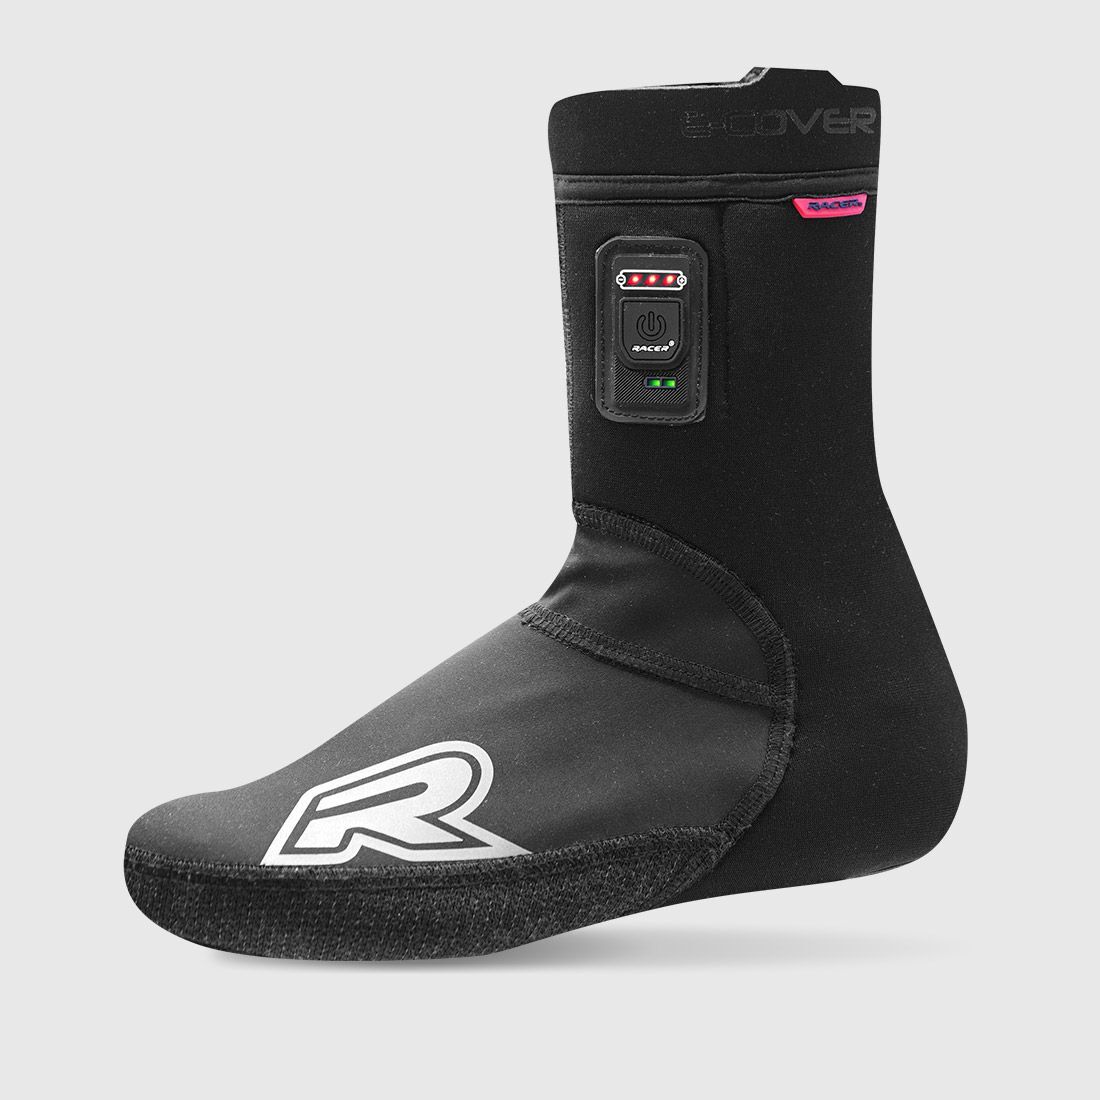 Racer E Cover - Sur-chaussures vélo | Hardloop